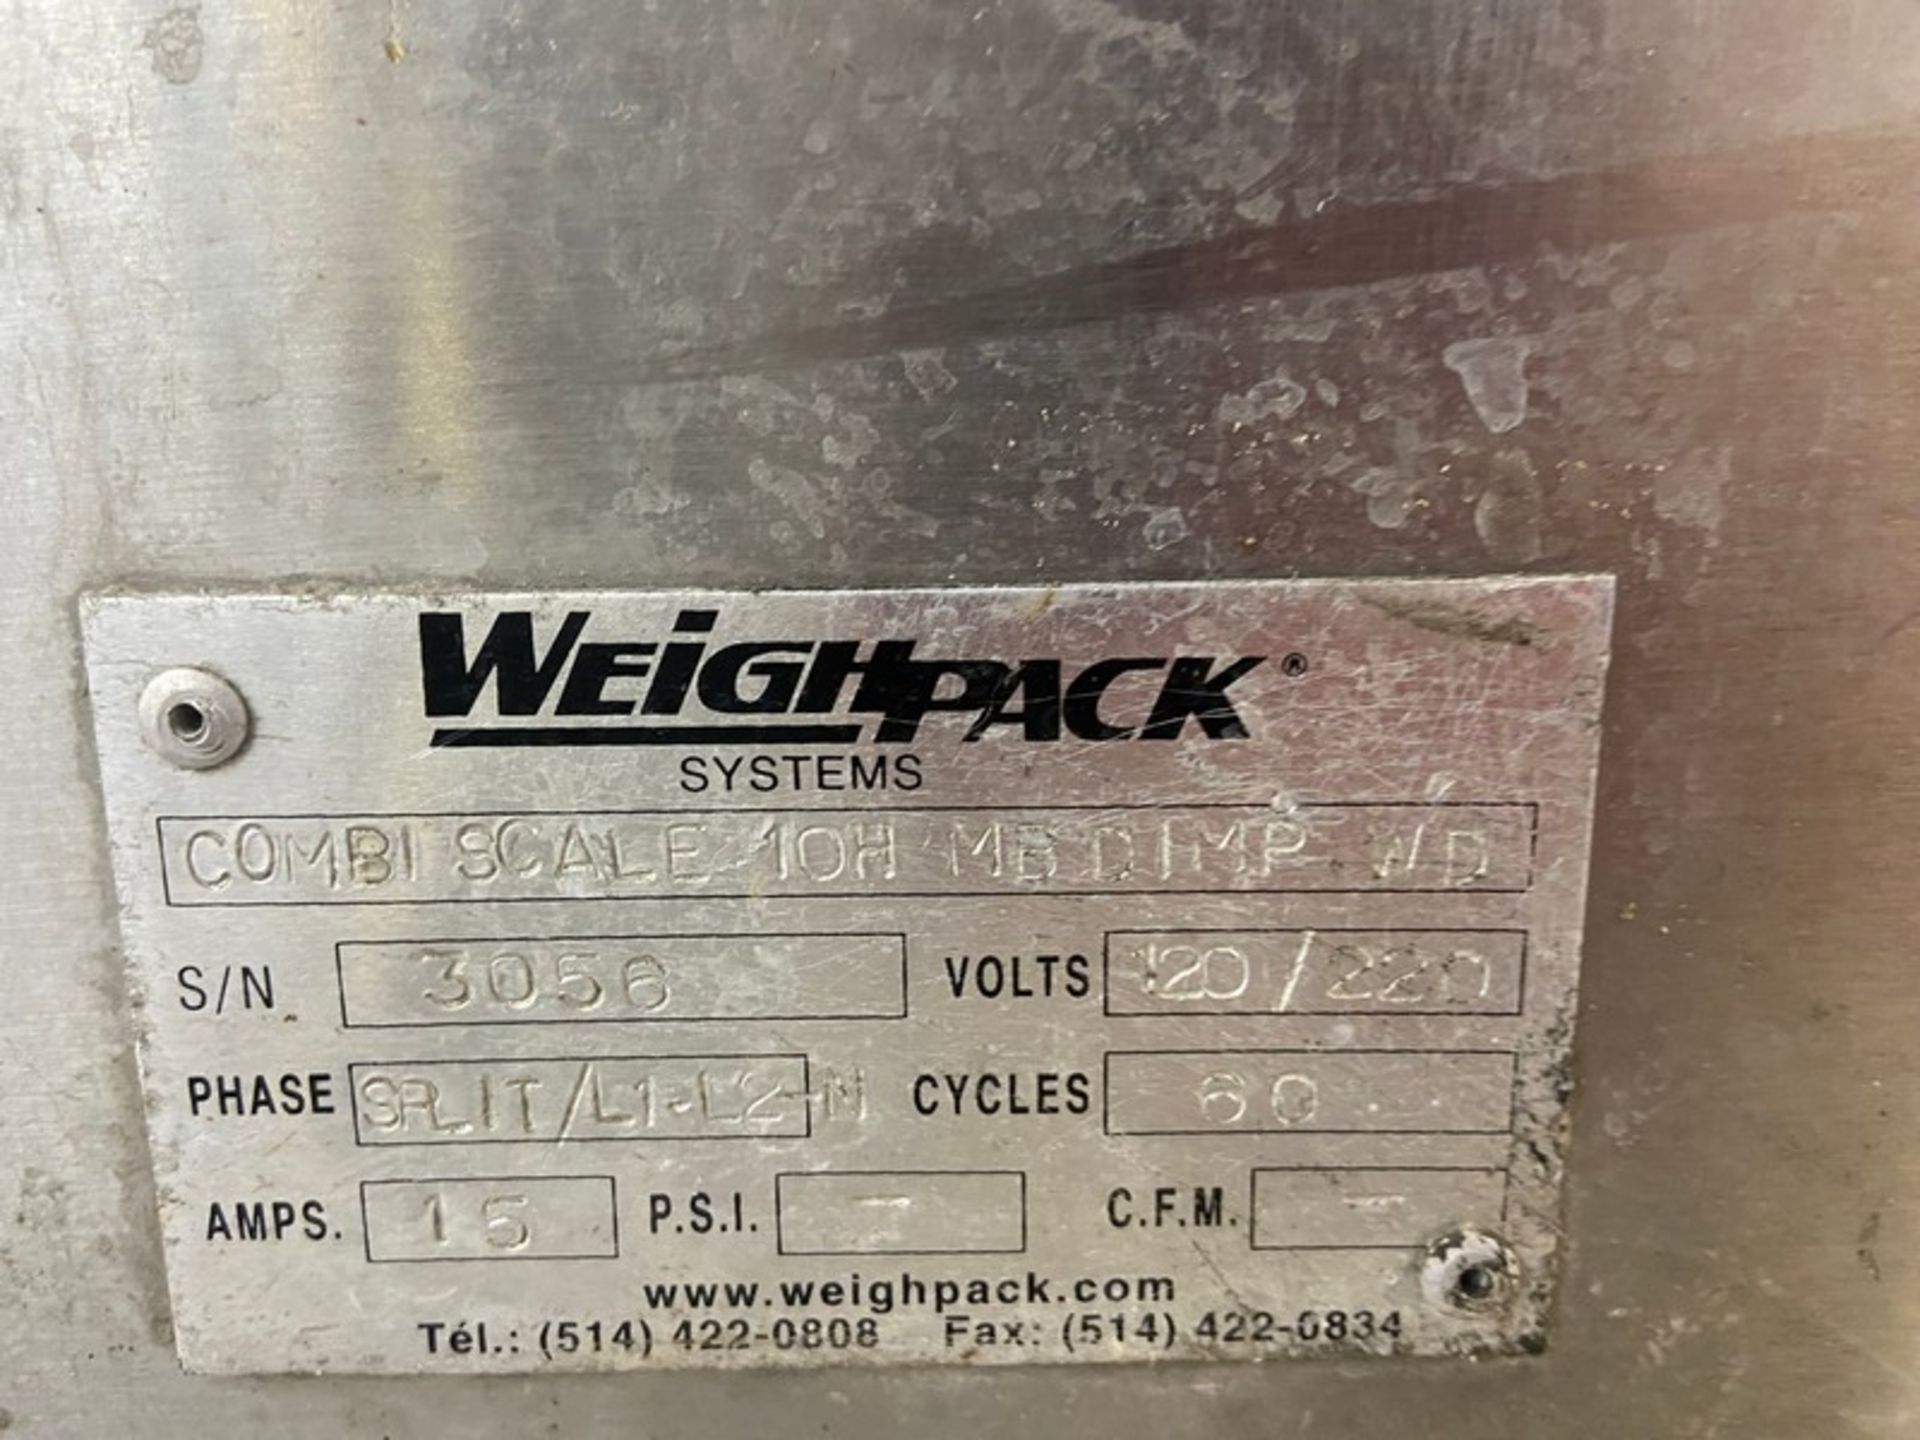 WeighPack Combi Scale, M/N 10H MBDIMP WD, S/N 3056, 120 Volts, with Stand & Infeed Bucket - Image 9 of 19